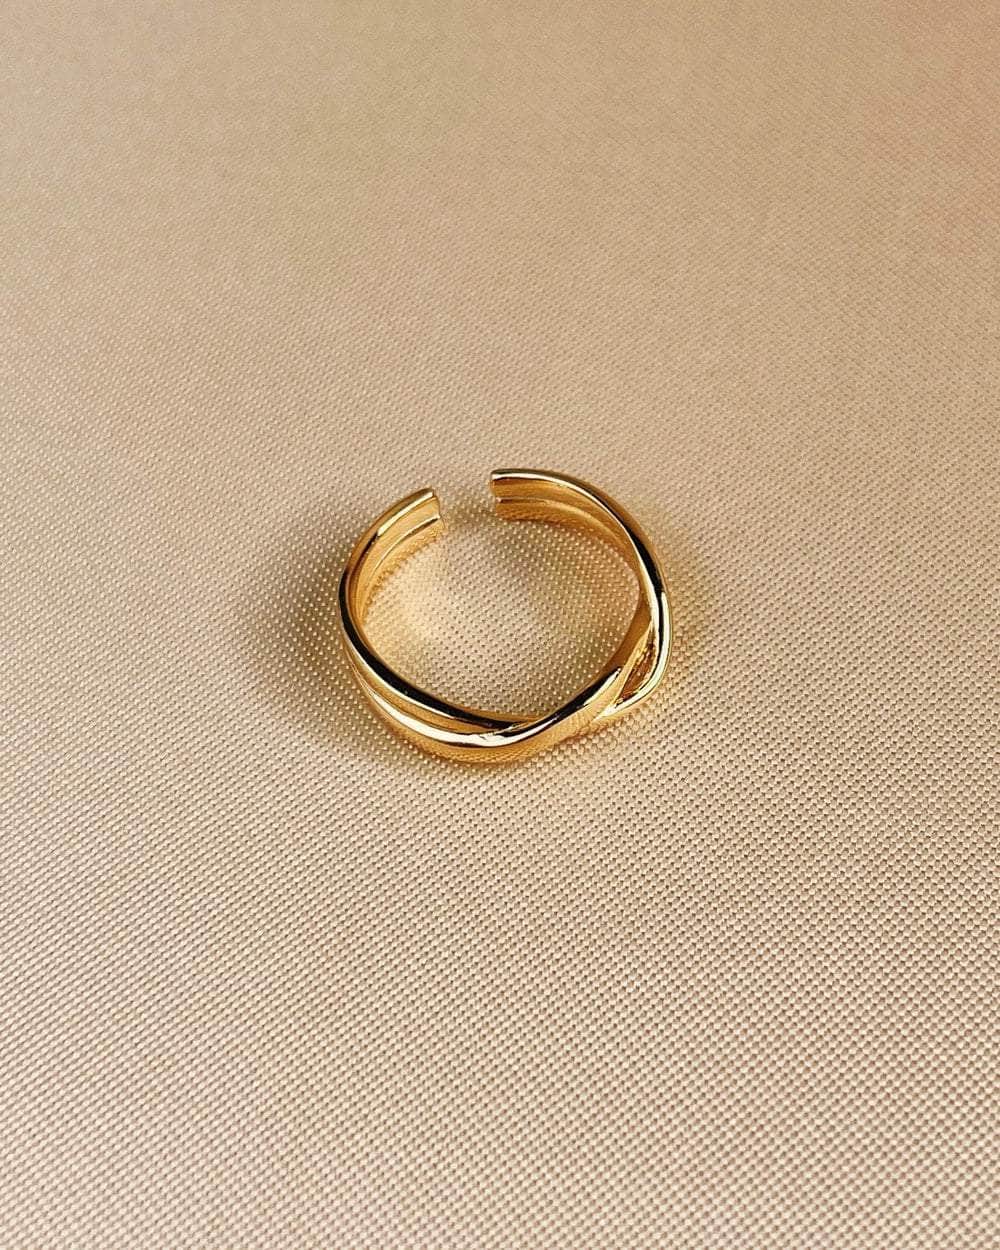 So Dainty Co. Rings Everly Gold Ring Gold Plated 925 Sterling Silver Jewelry